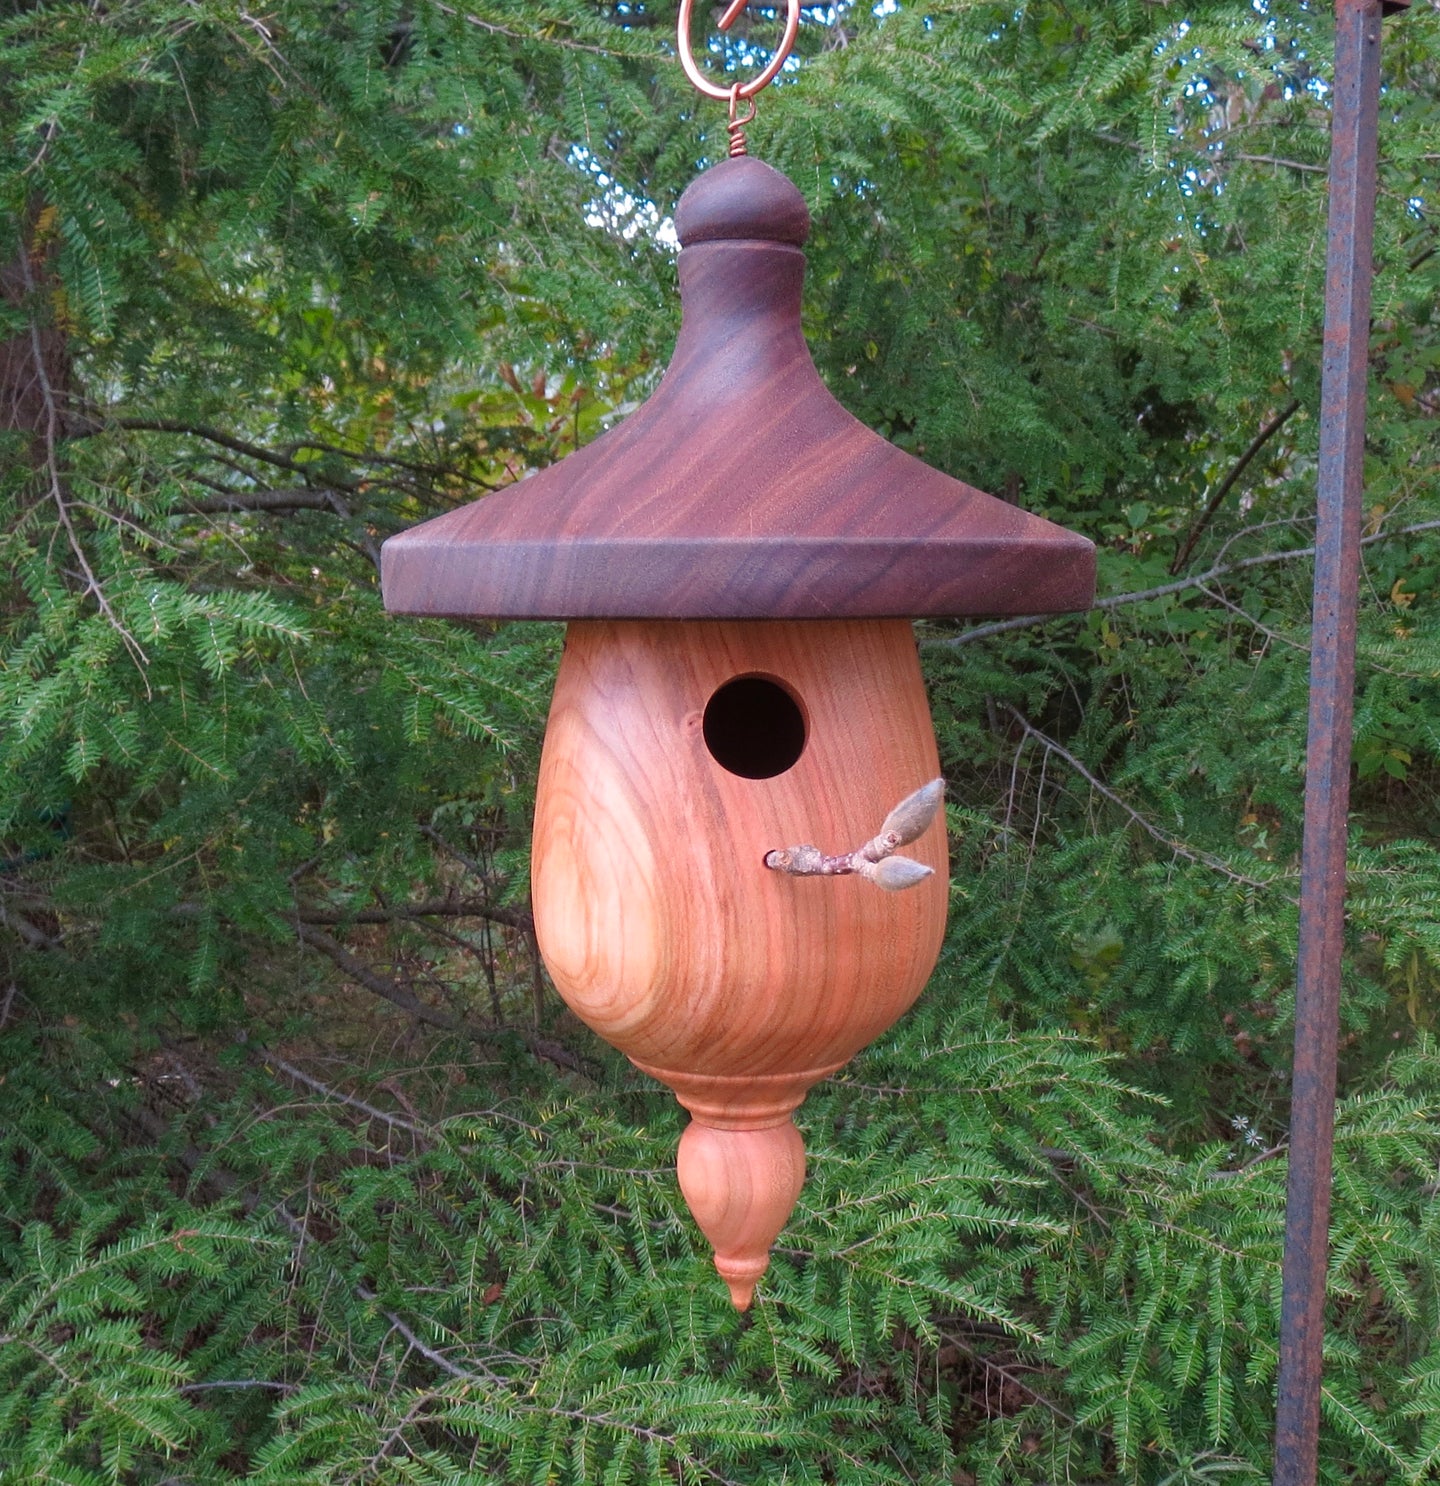 Cherry and Black Walnut turned birdhouse, designed and created by Schoolhouse Woodcrafts